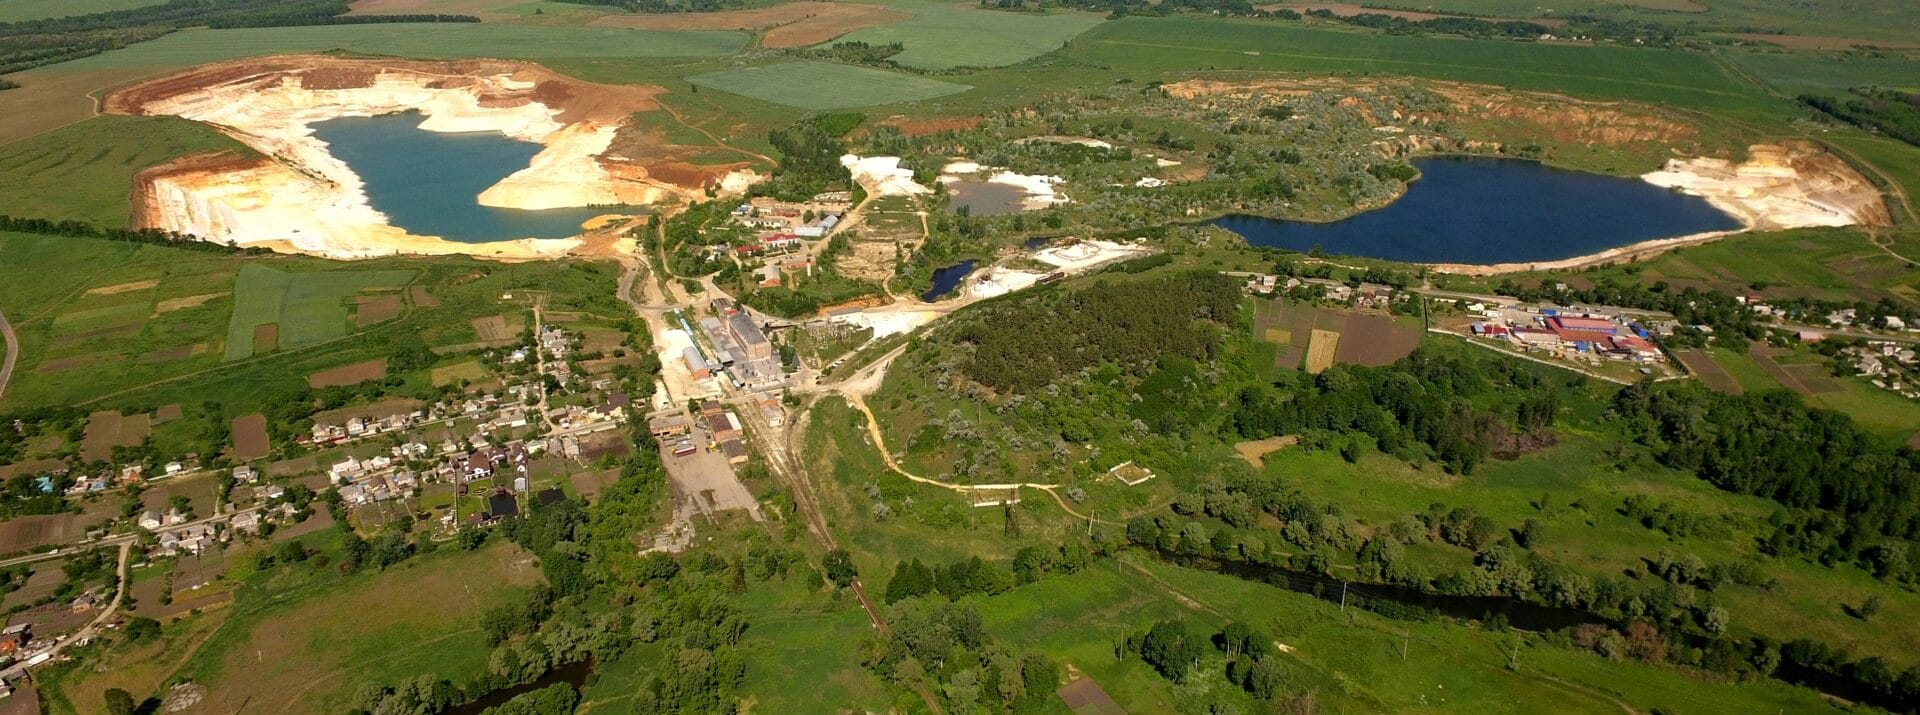 Mining and Processing Plant